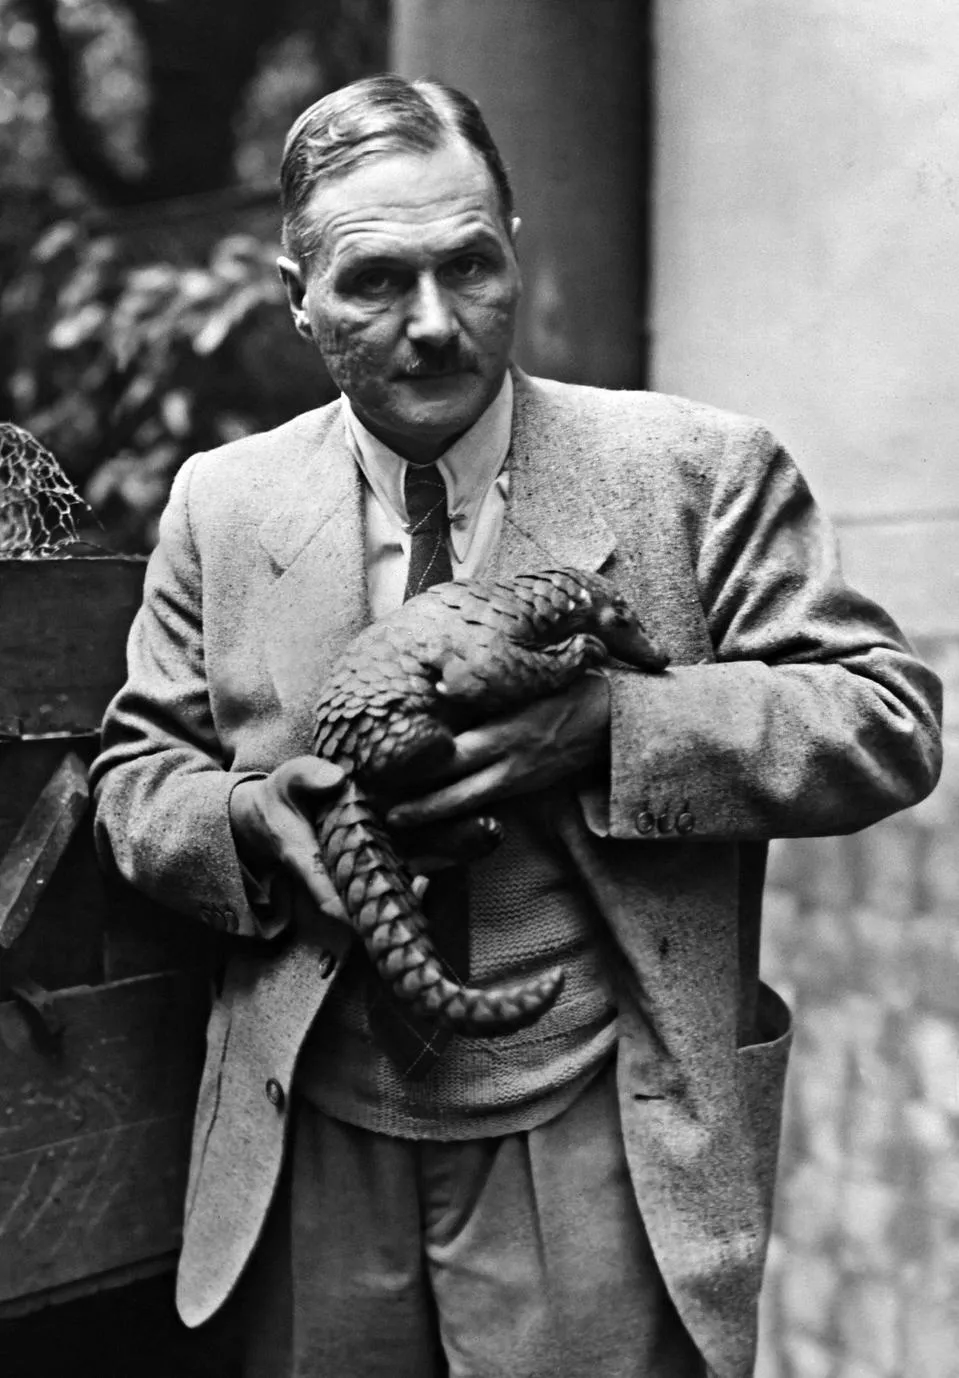 Lutz Heck with a scaly anteater, 1940